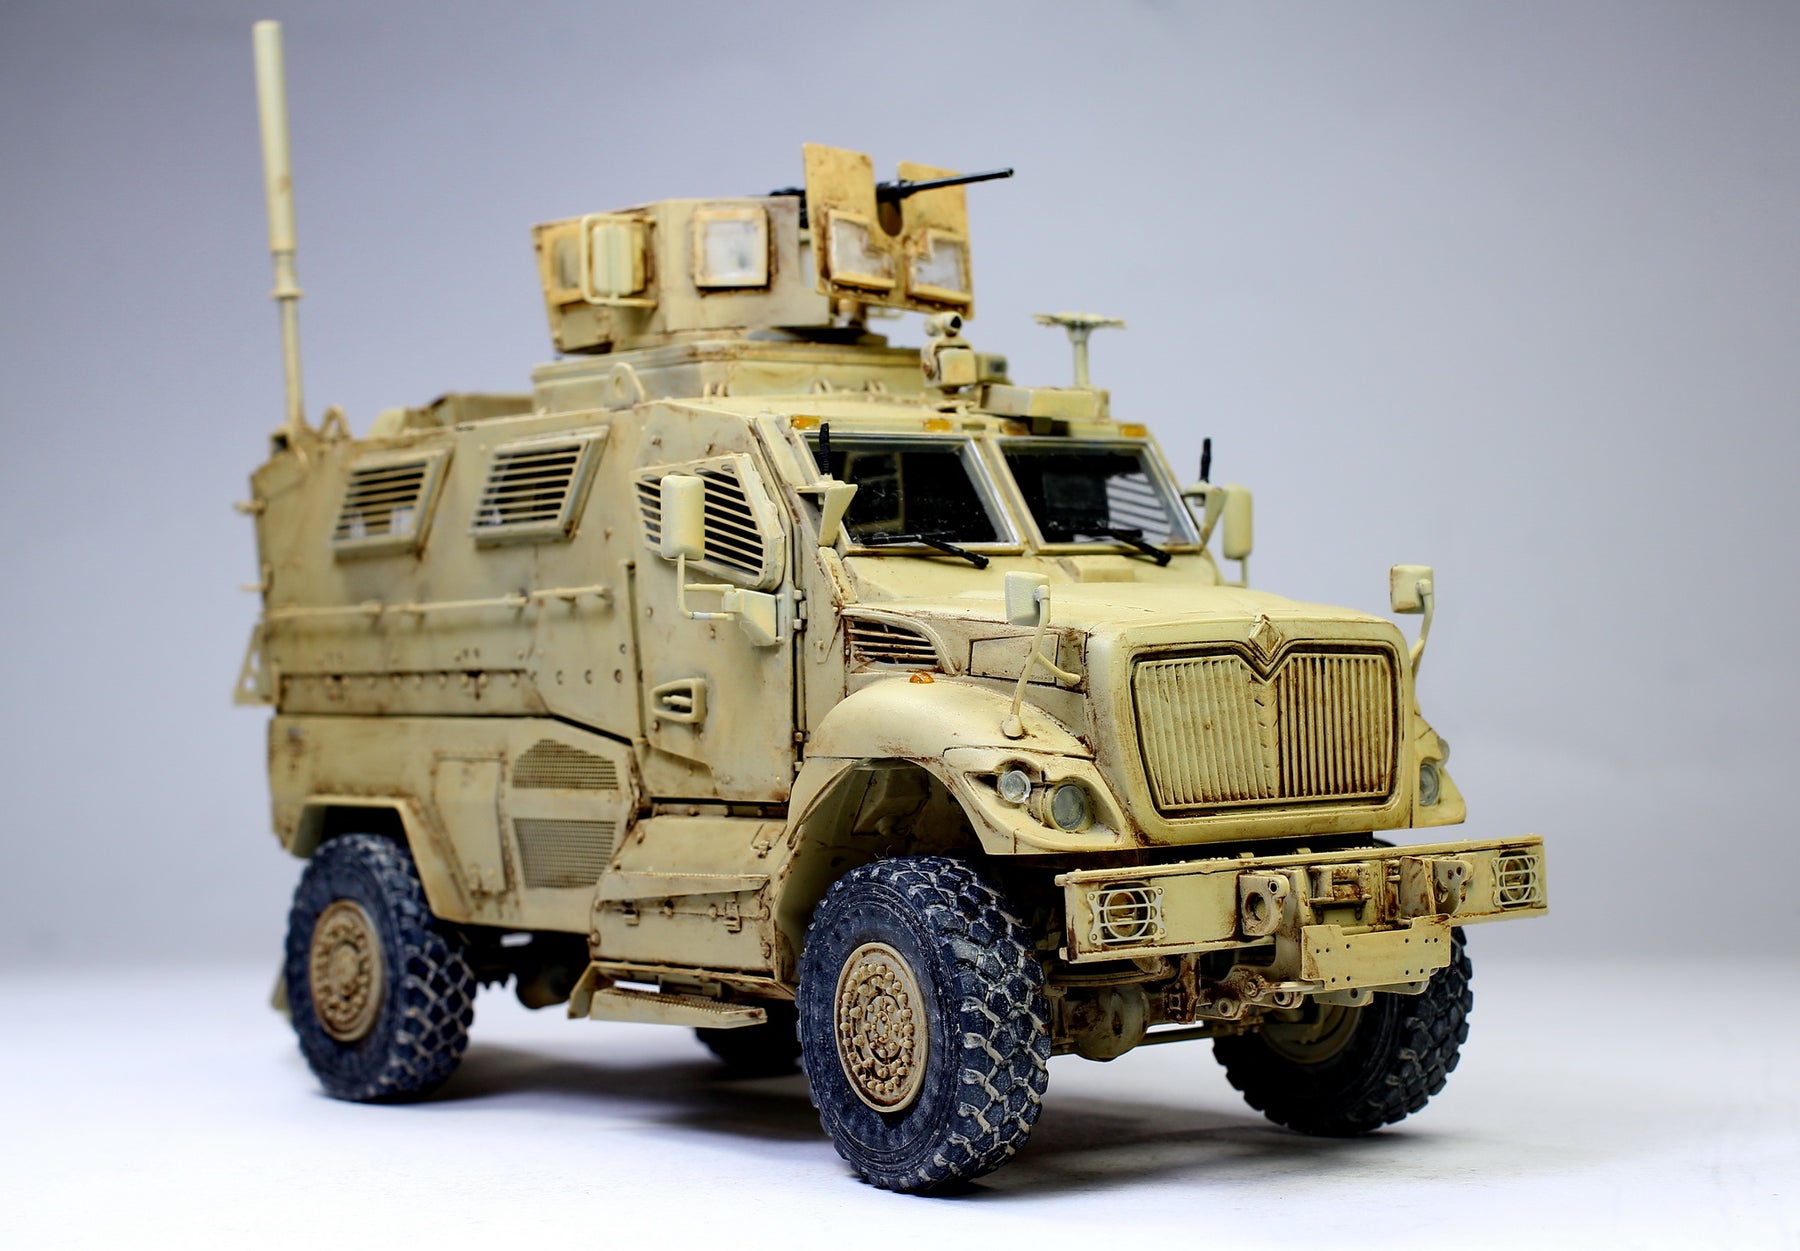 Cougar 4x4 MRAP Armoured Fighting Vehicle, 1/35 Scaled Ratio - Pro Built  Model